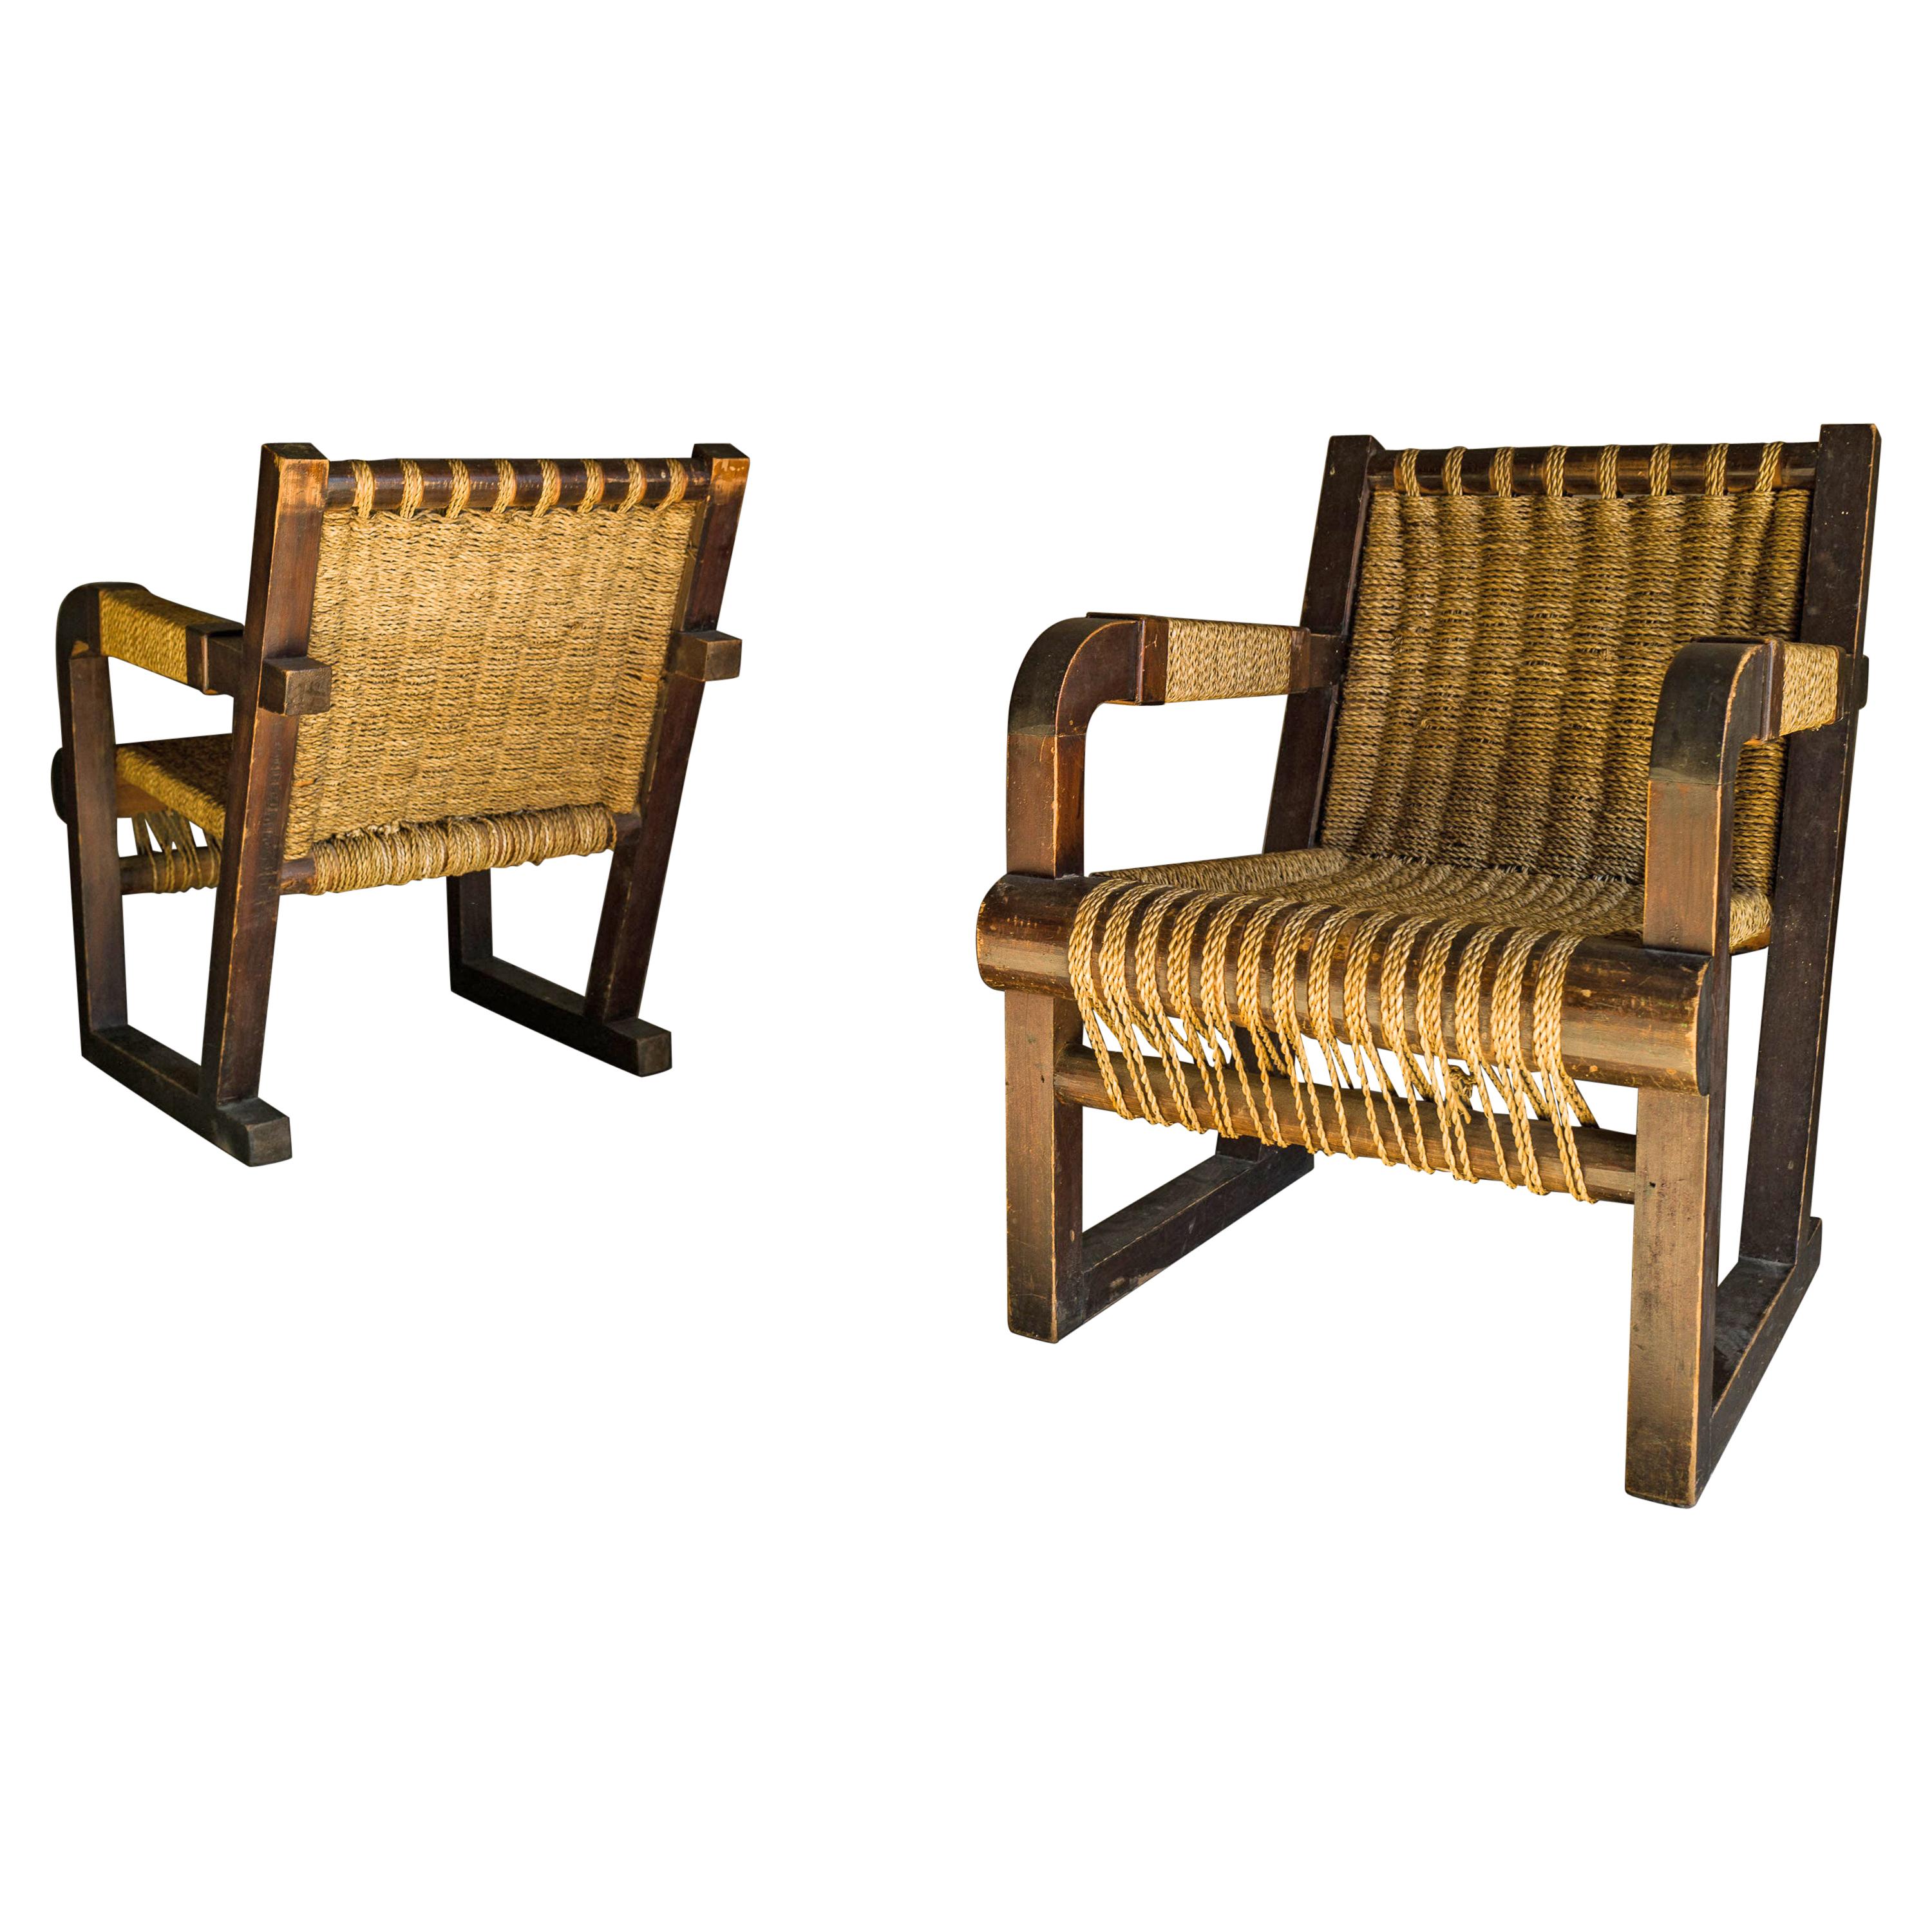 Rare Pair of Woven Lounge Chairs from France, circa 1960